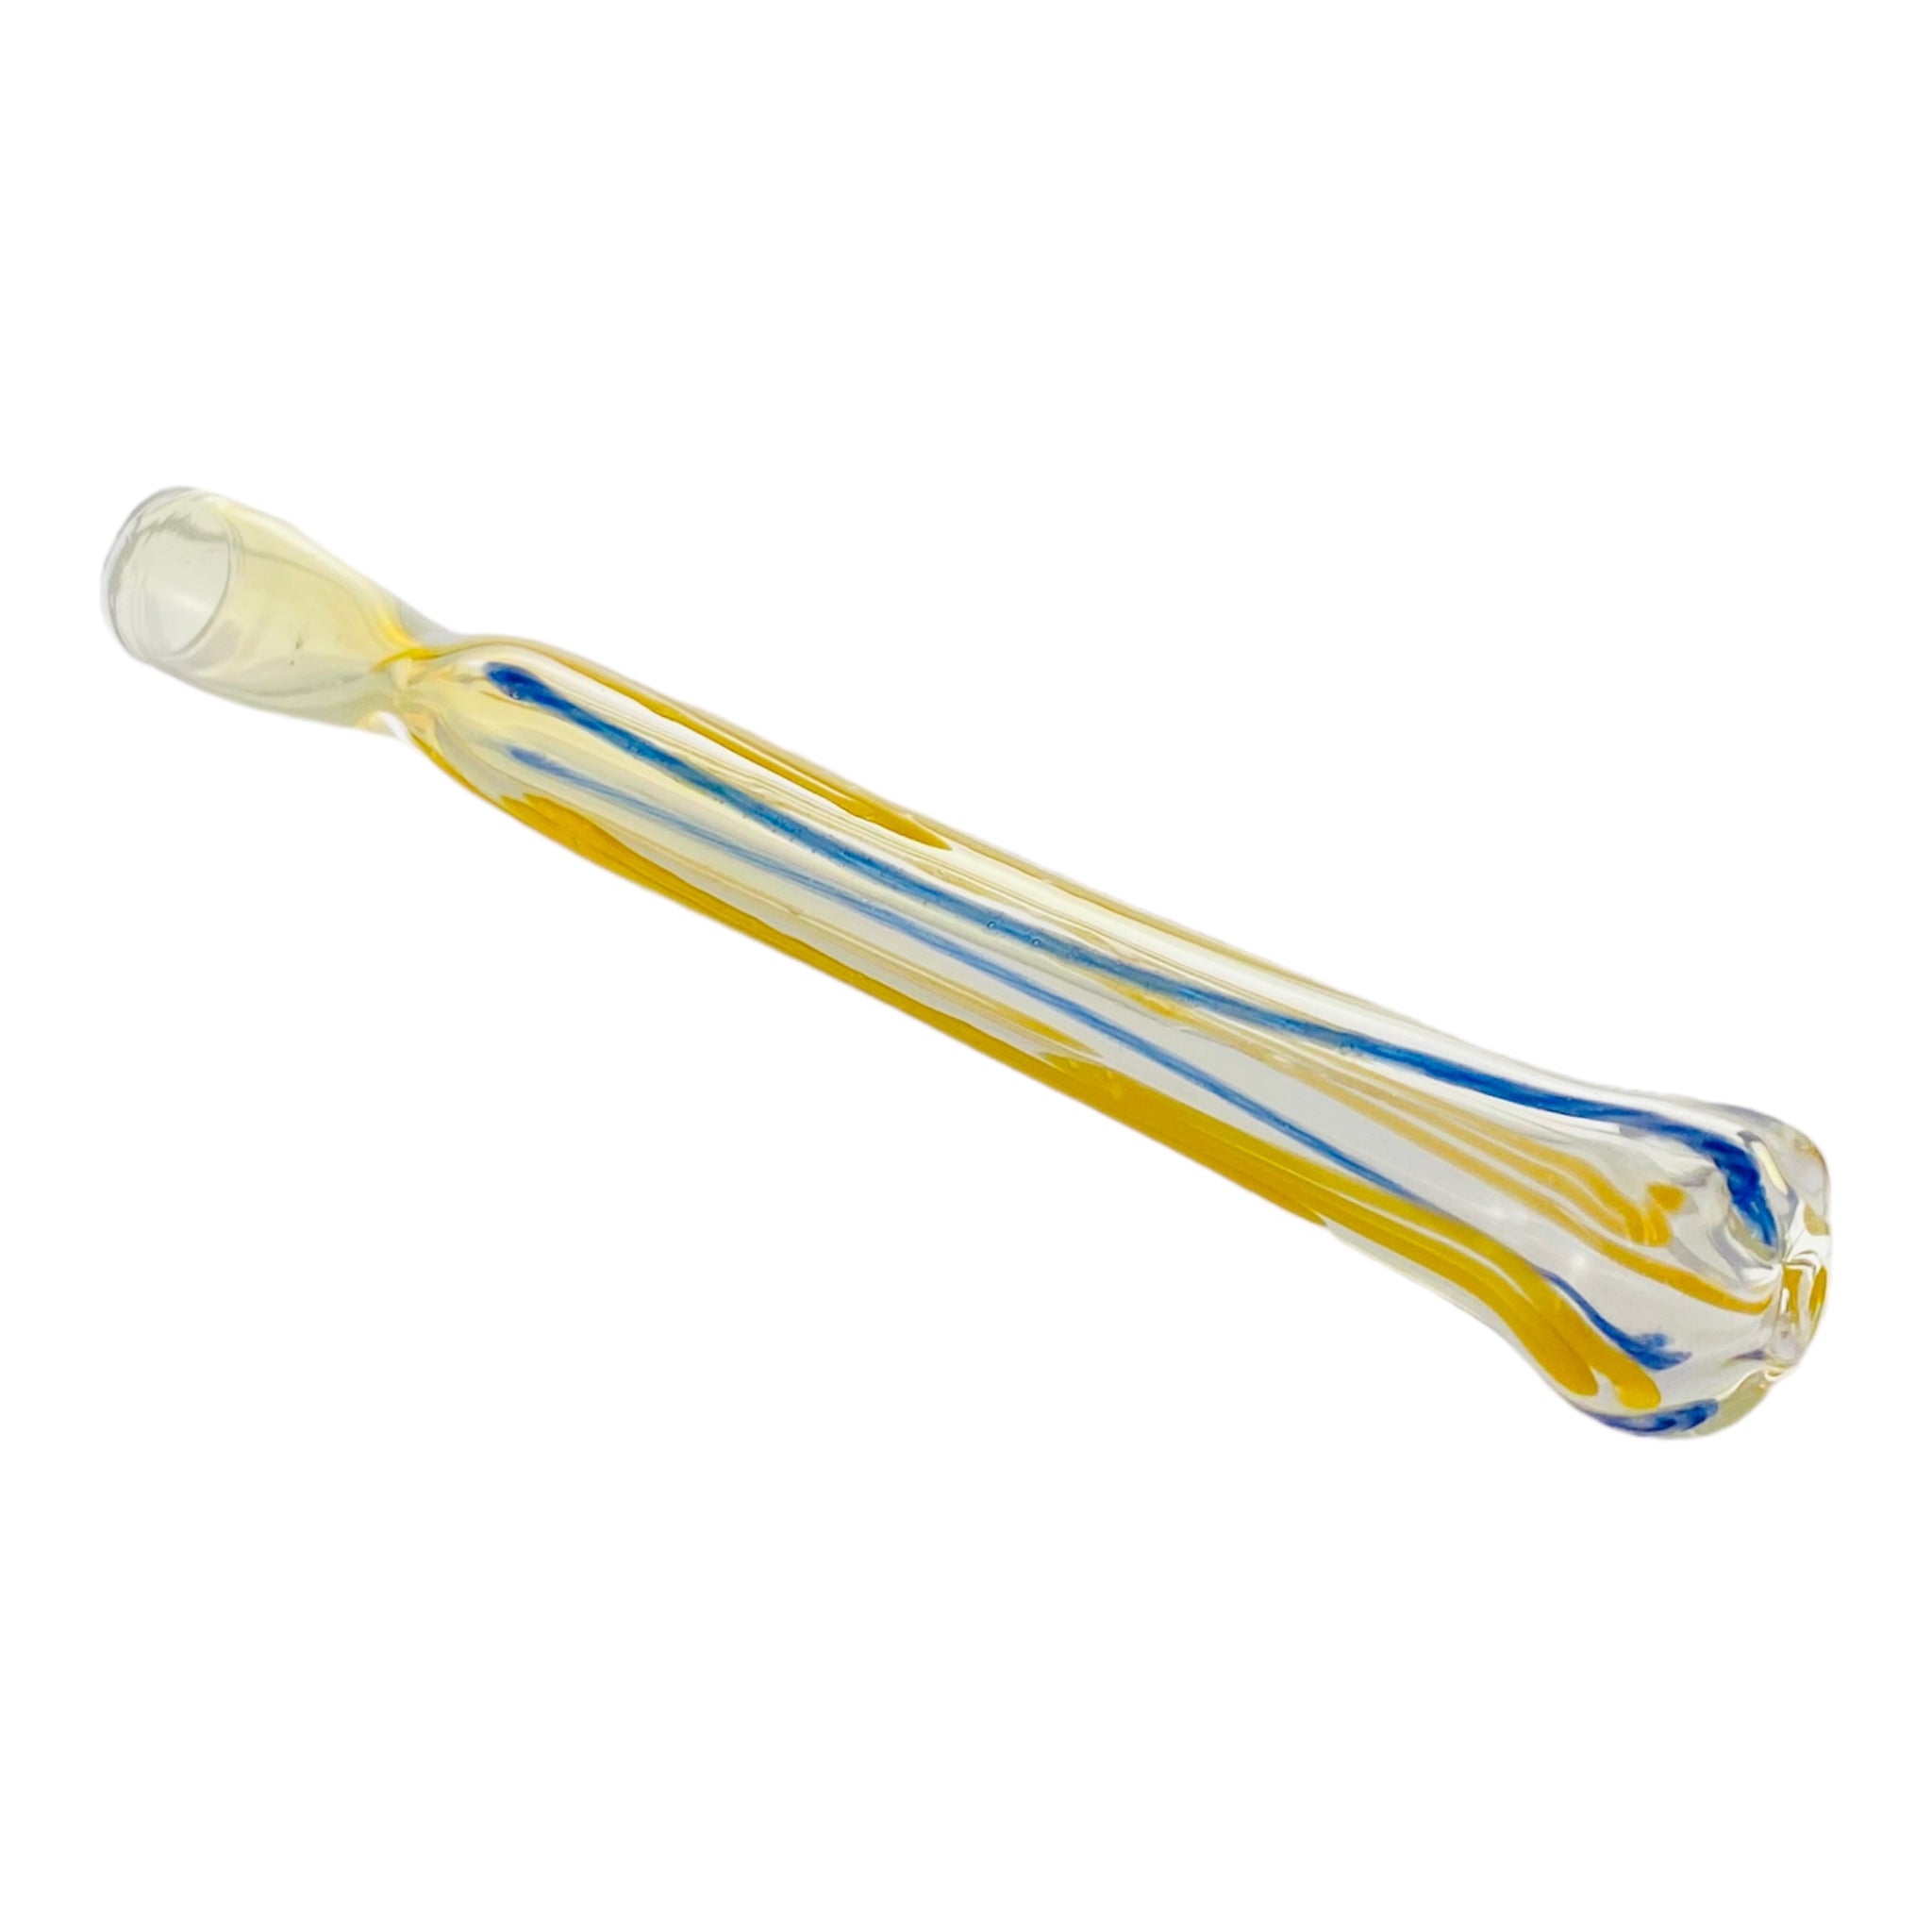 Glass Chillum Pipe - Extra Long Blue And Yellow Hand Pipe